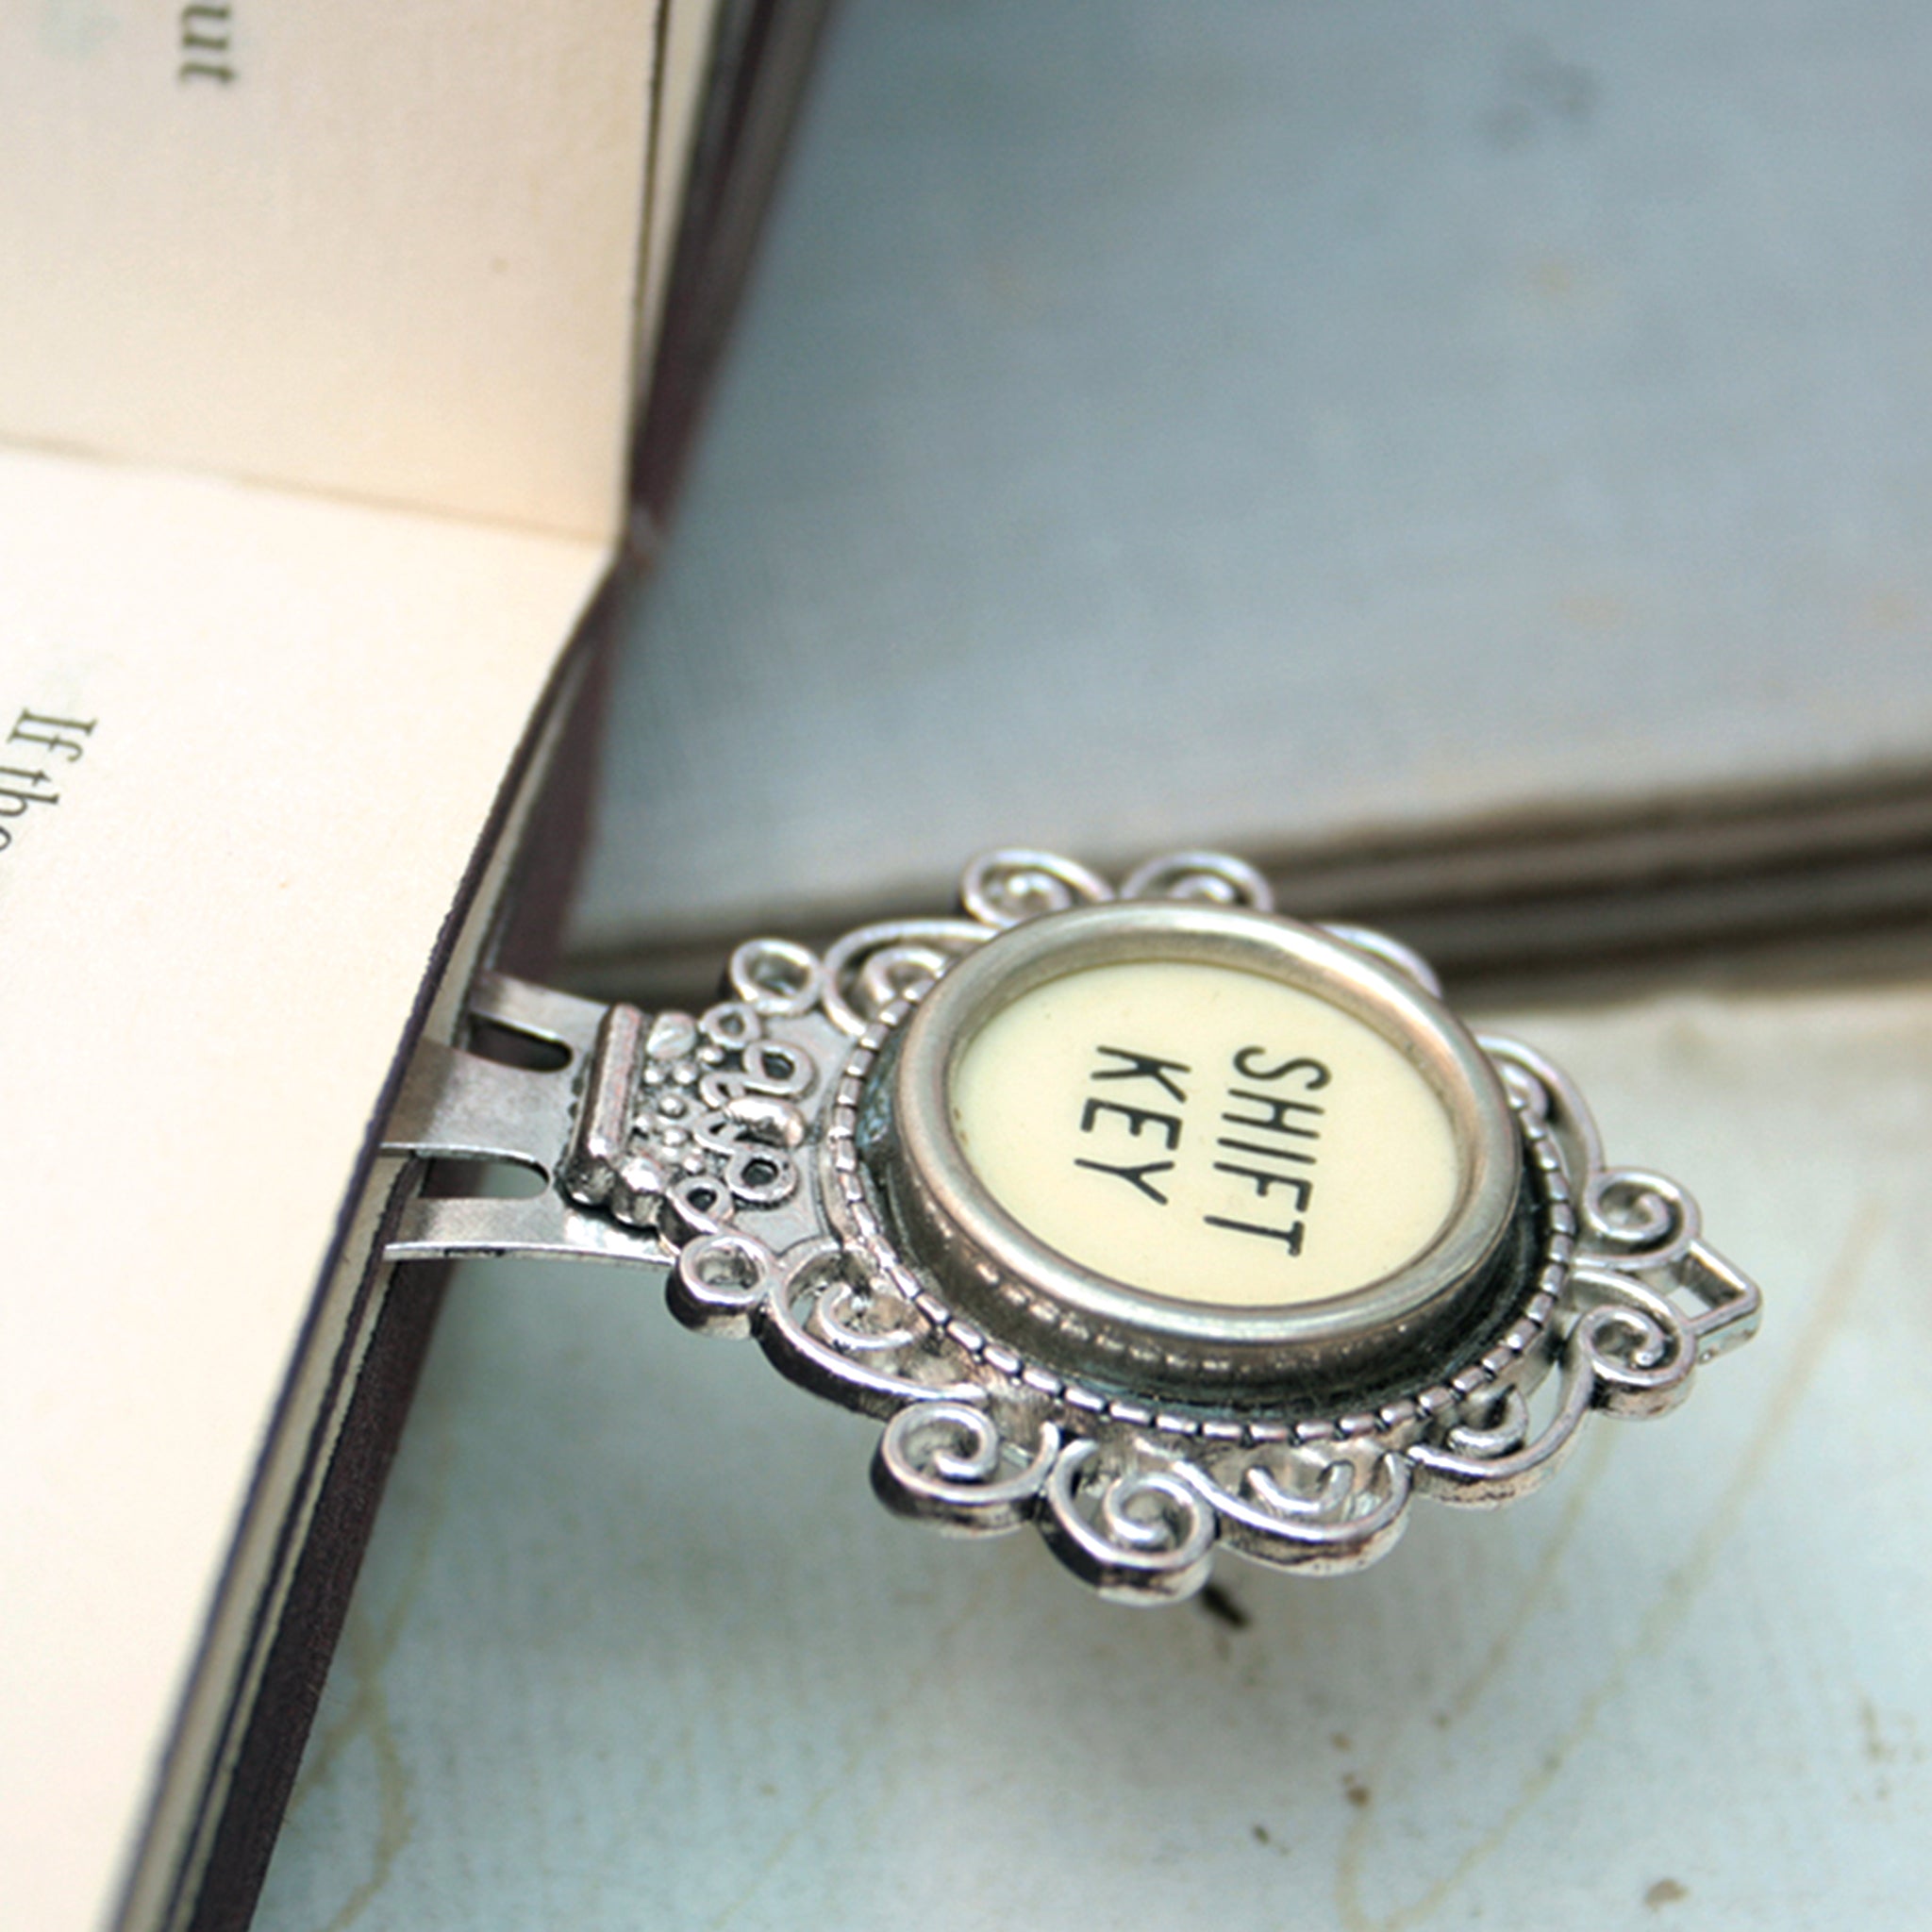 Shift Key metal bookmark for books - made of authentic vintage typewriter key in ivory color